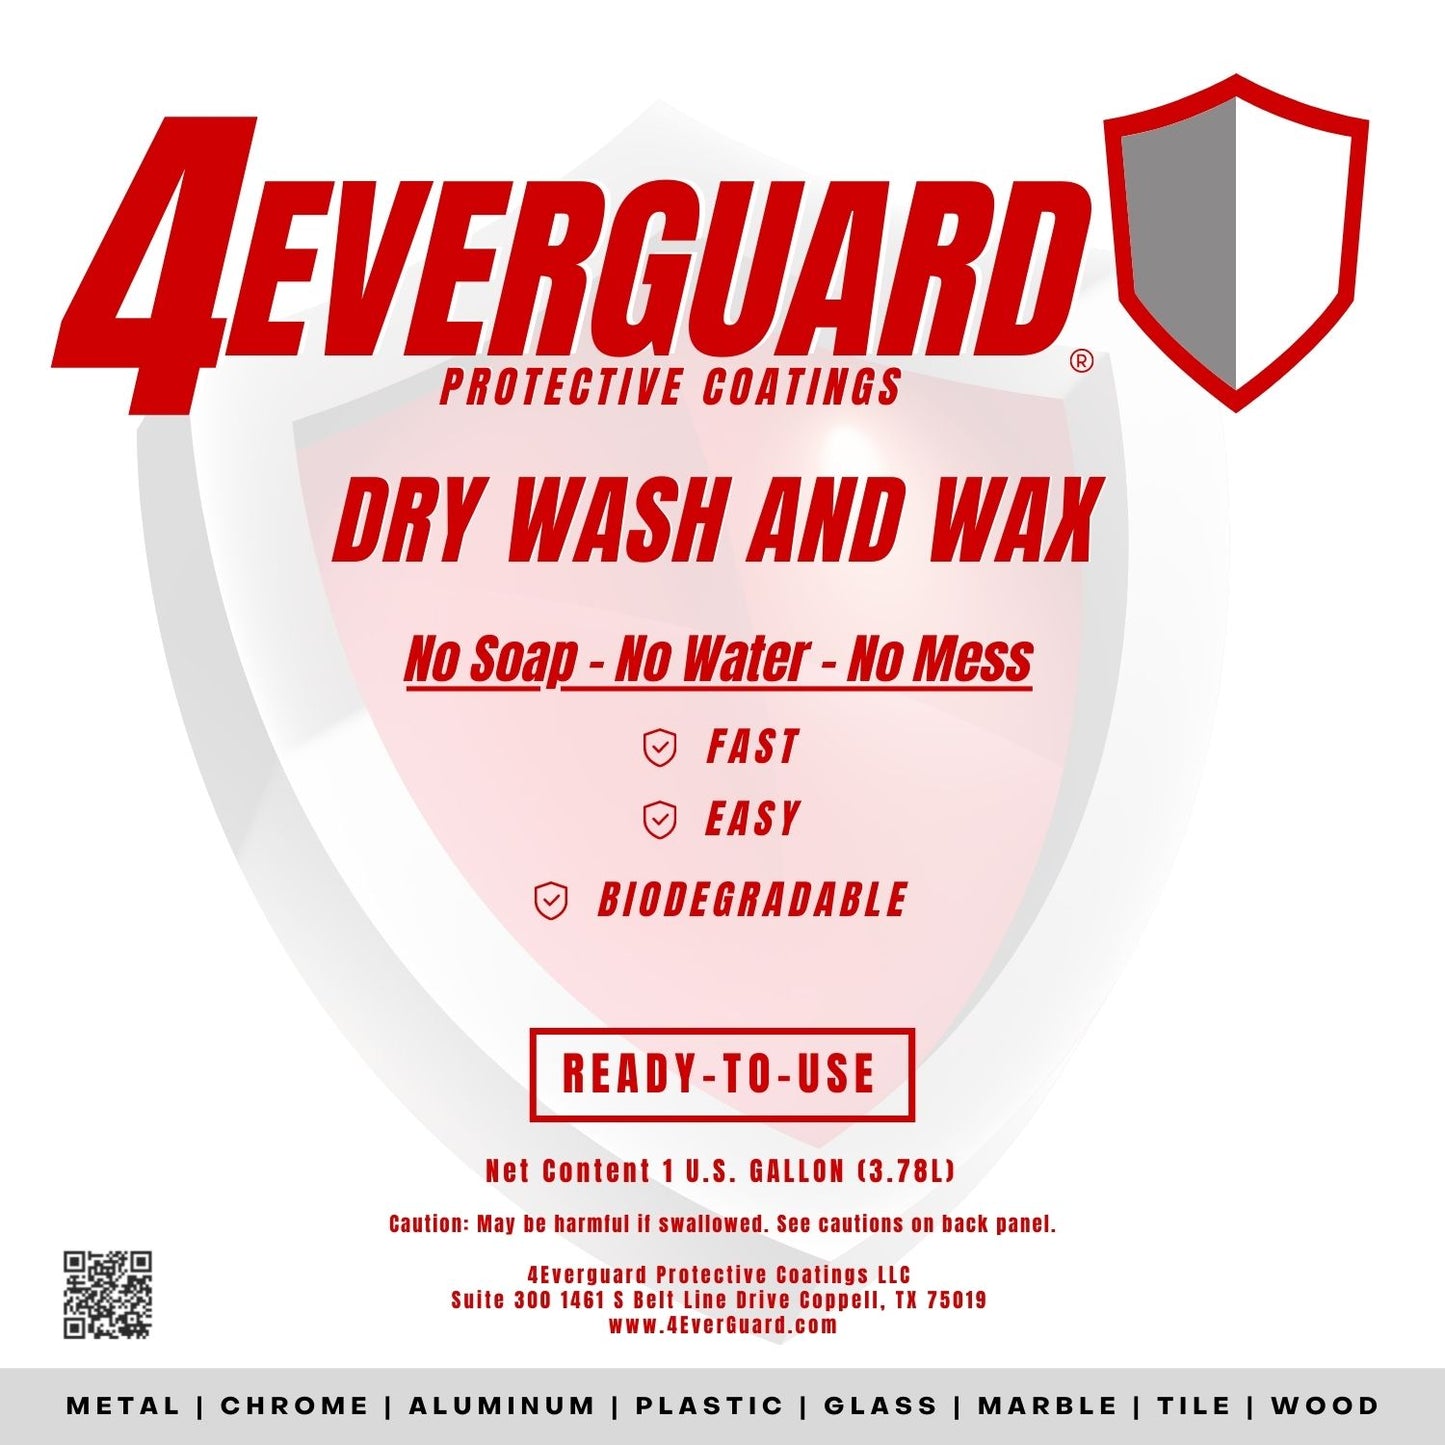 Clean & Protect Short Term - Dry Wash & Wax